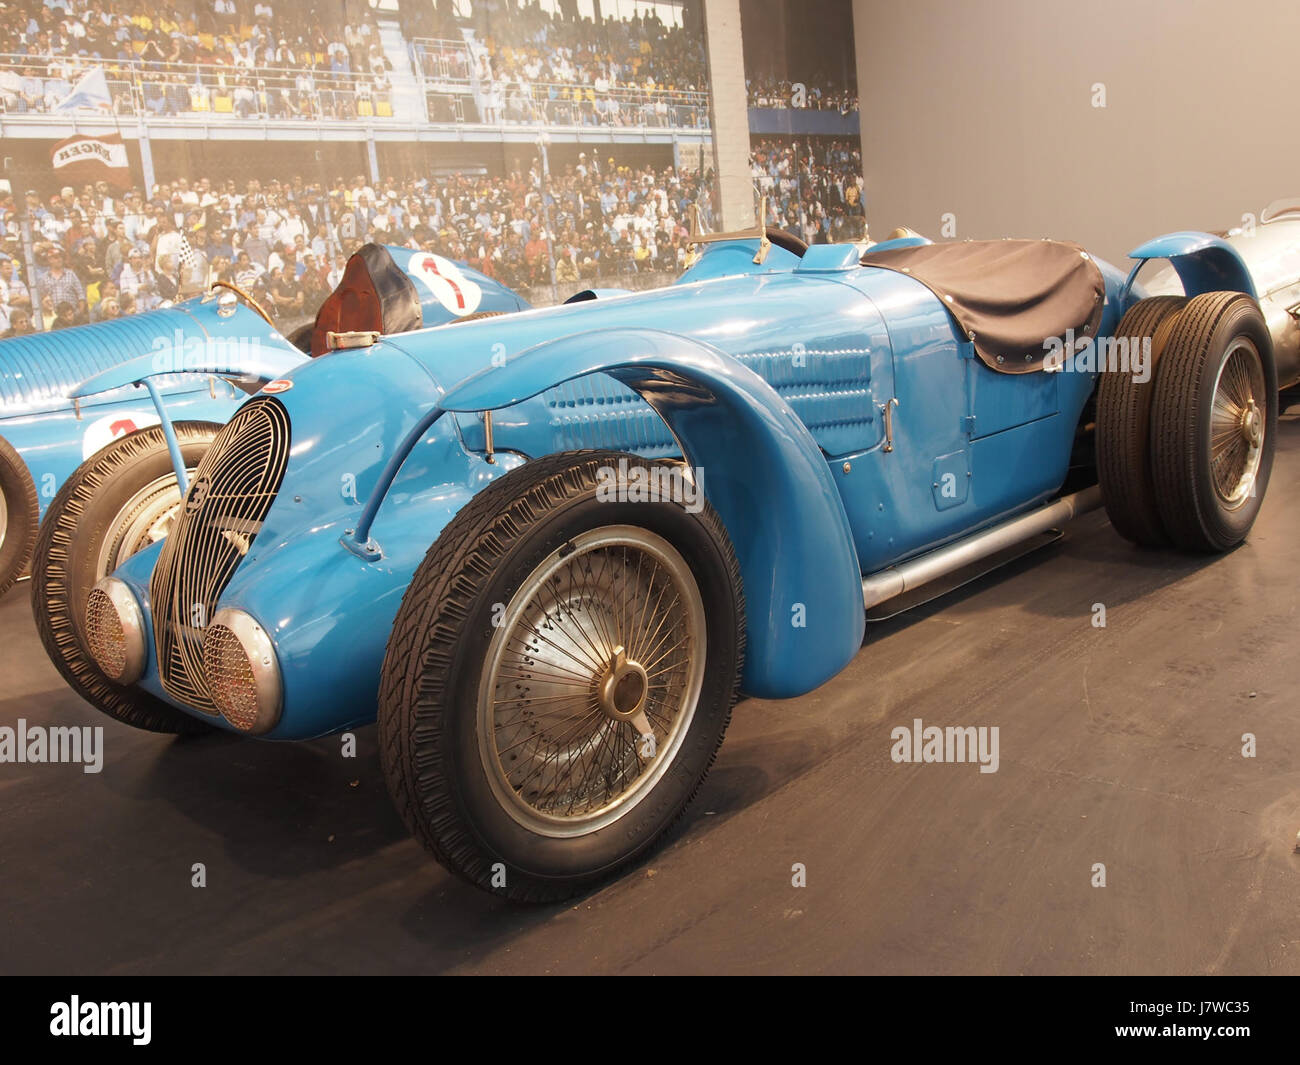 1938 Bugatti Type 59 GP 50B, 8 cylindres, 4741cm3, 400hp, 300km/h, photo 2 Banque D'Images